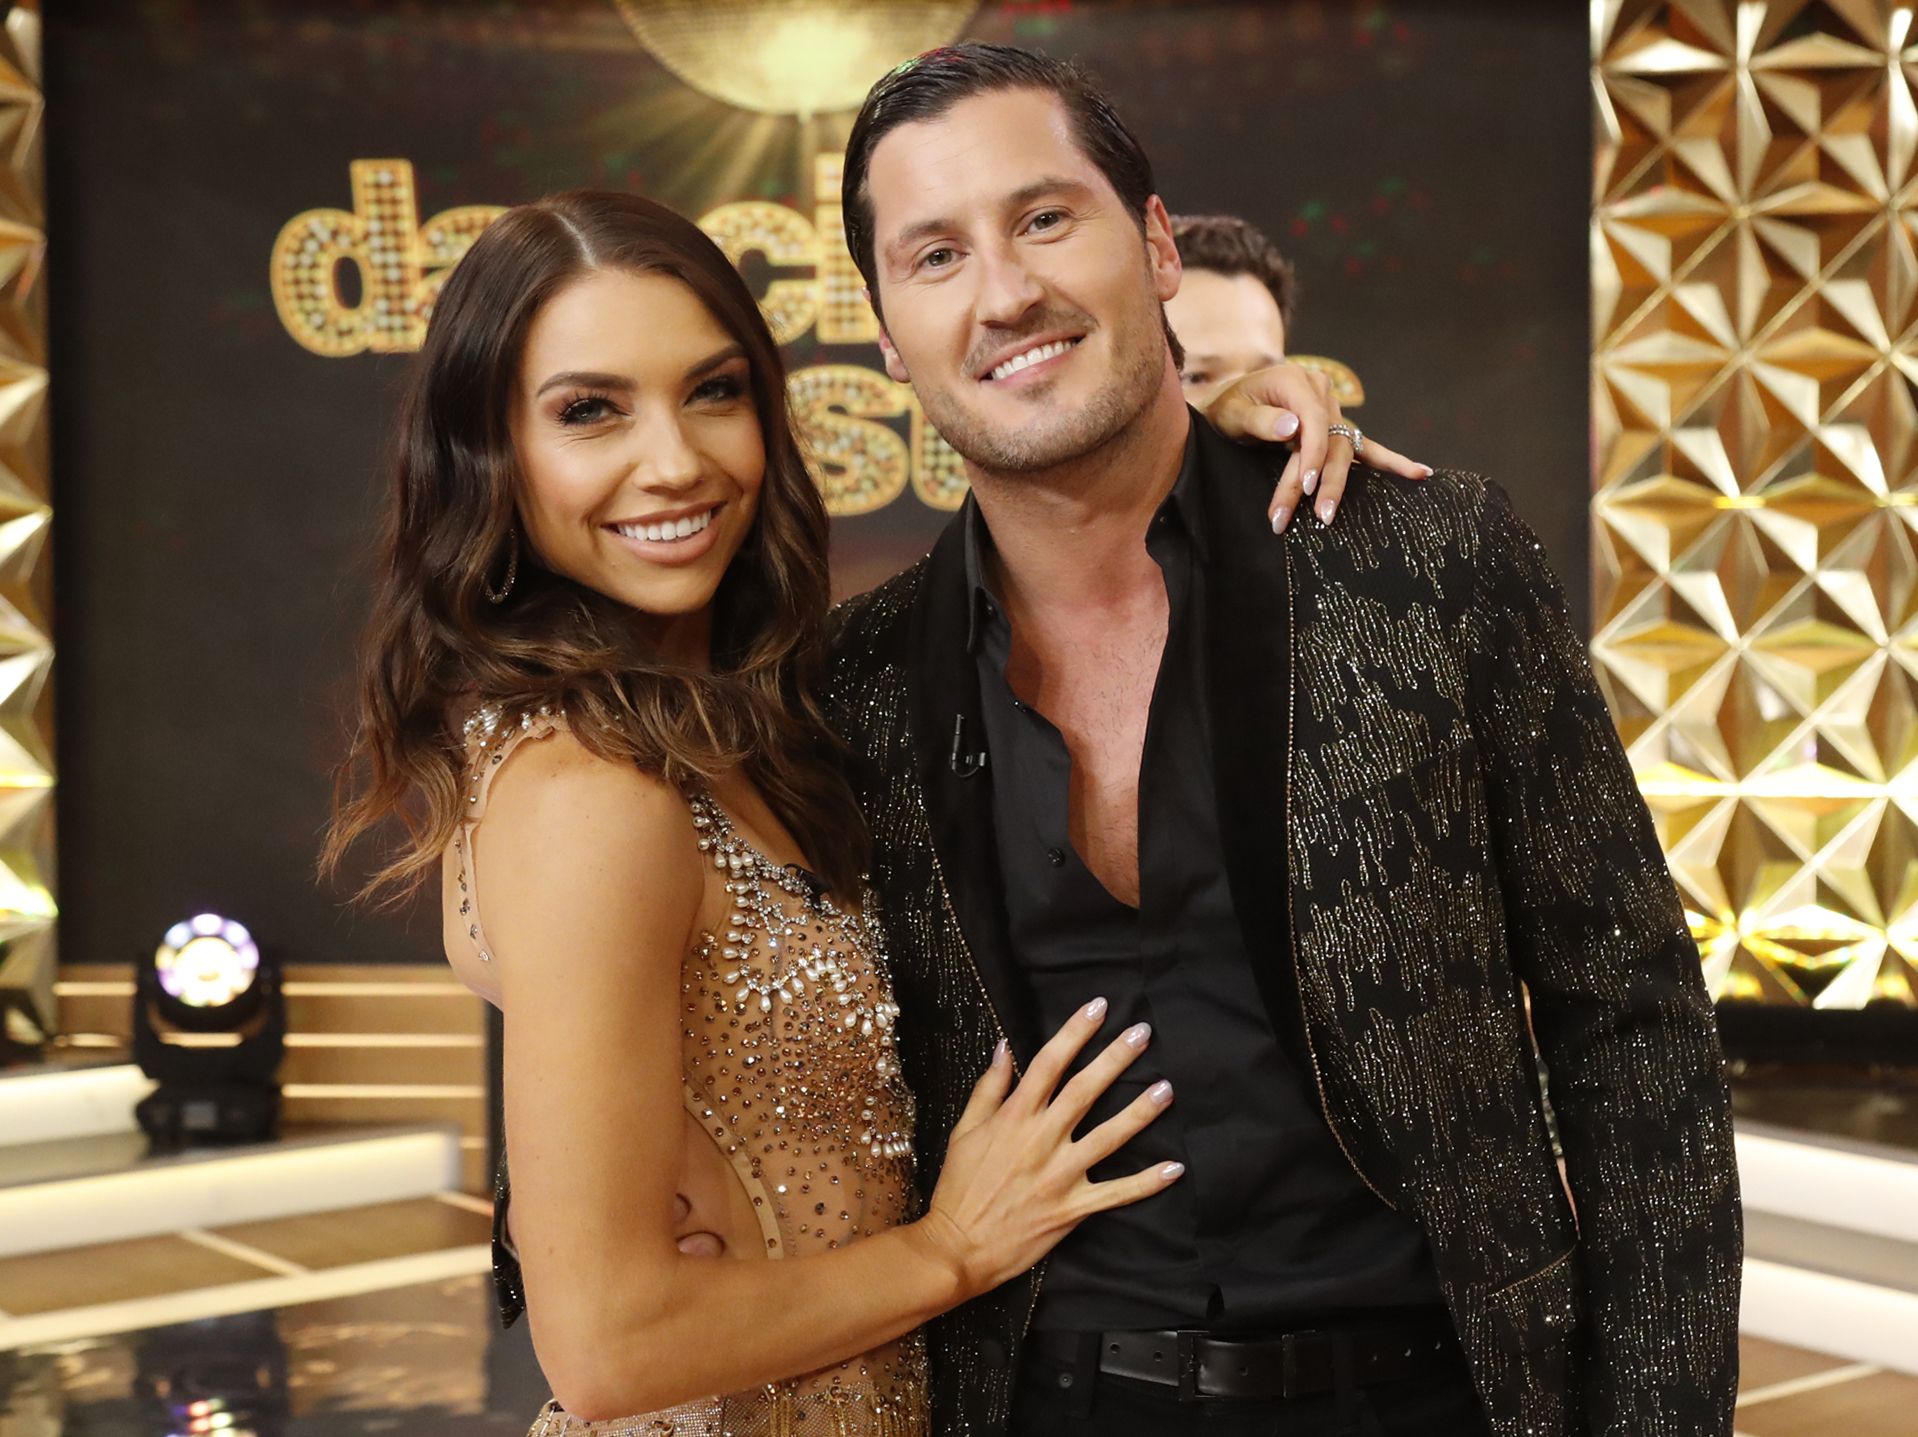 Dancing With the Stars' Couples Who Dated, Got Married